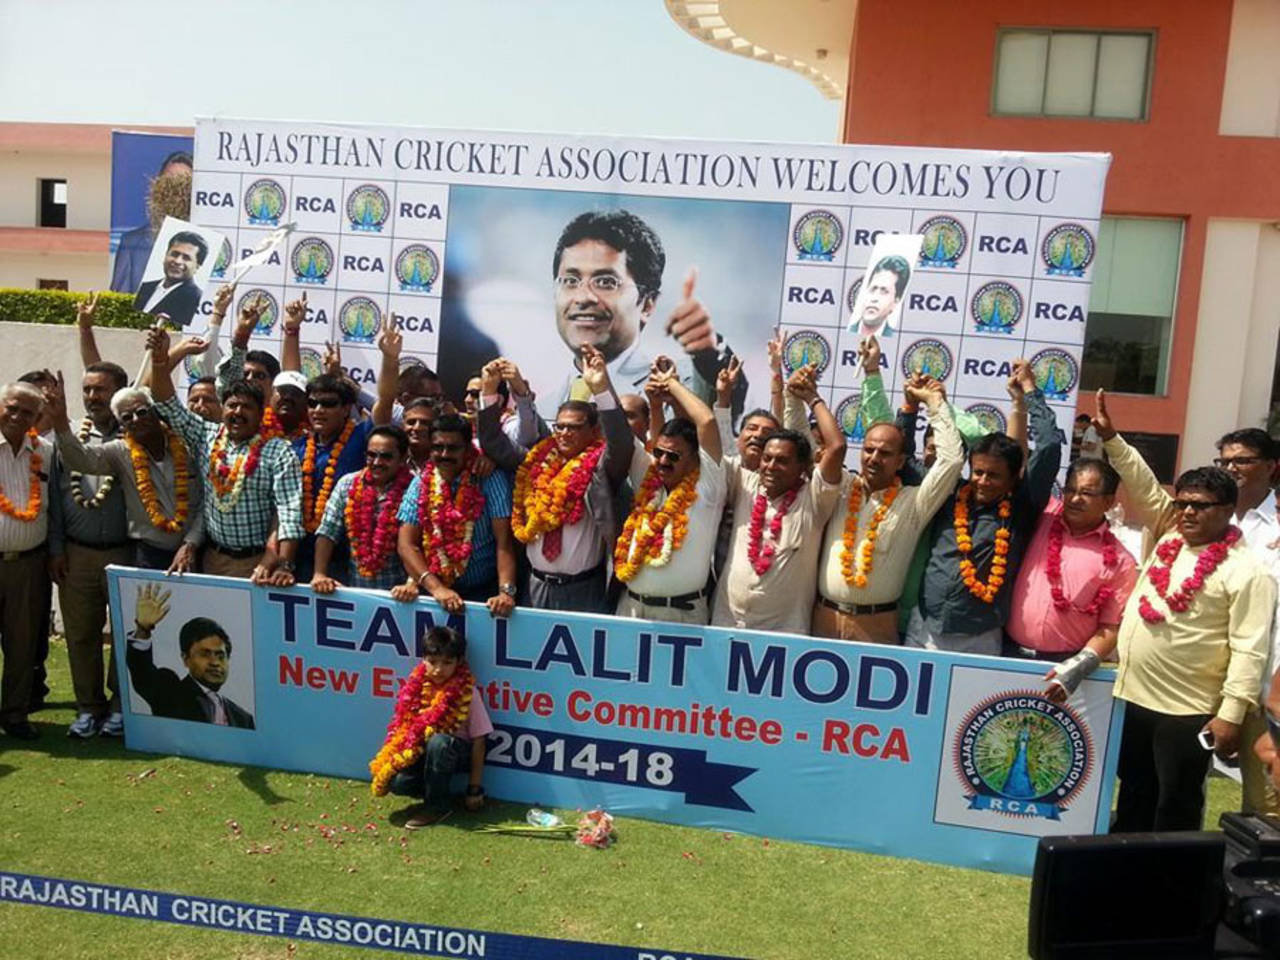 Lalit Modi's supporters celebrate after he is named Rajasthan Cricket Association president, Jaipur, May 6, 2014